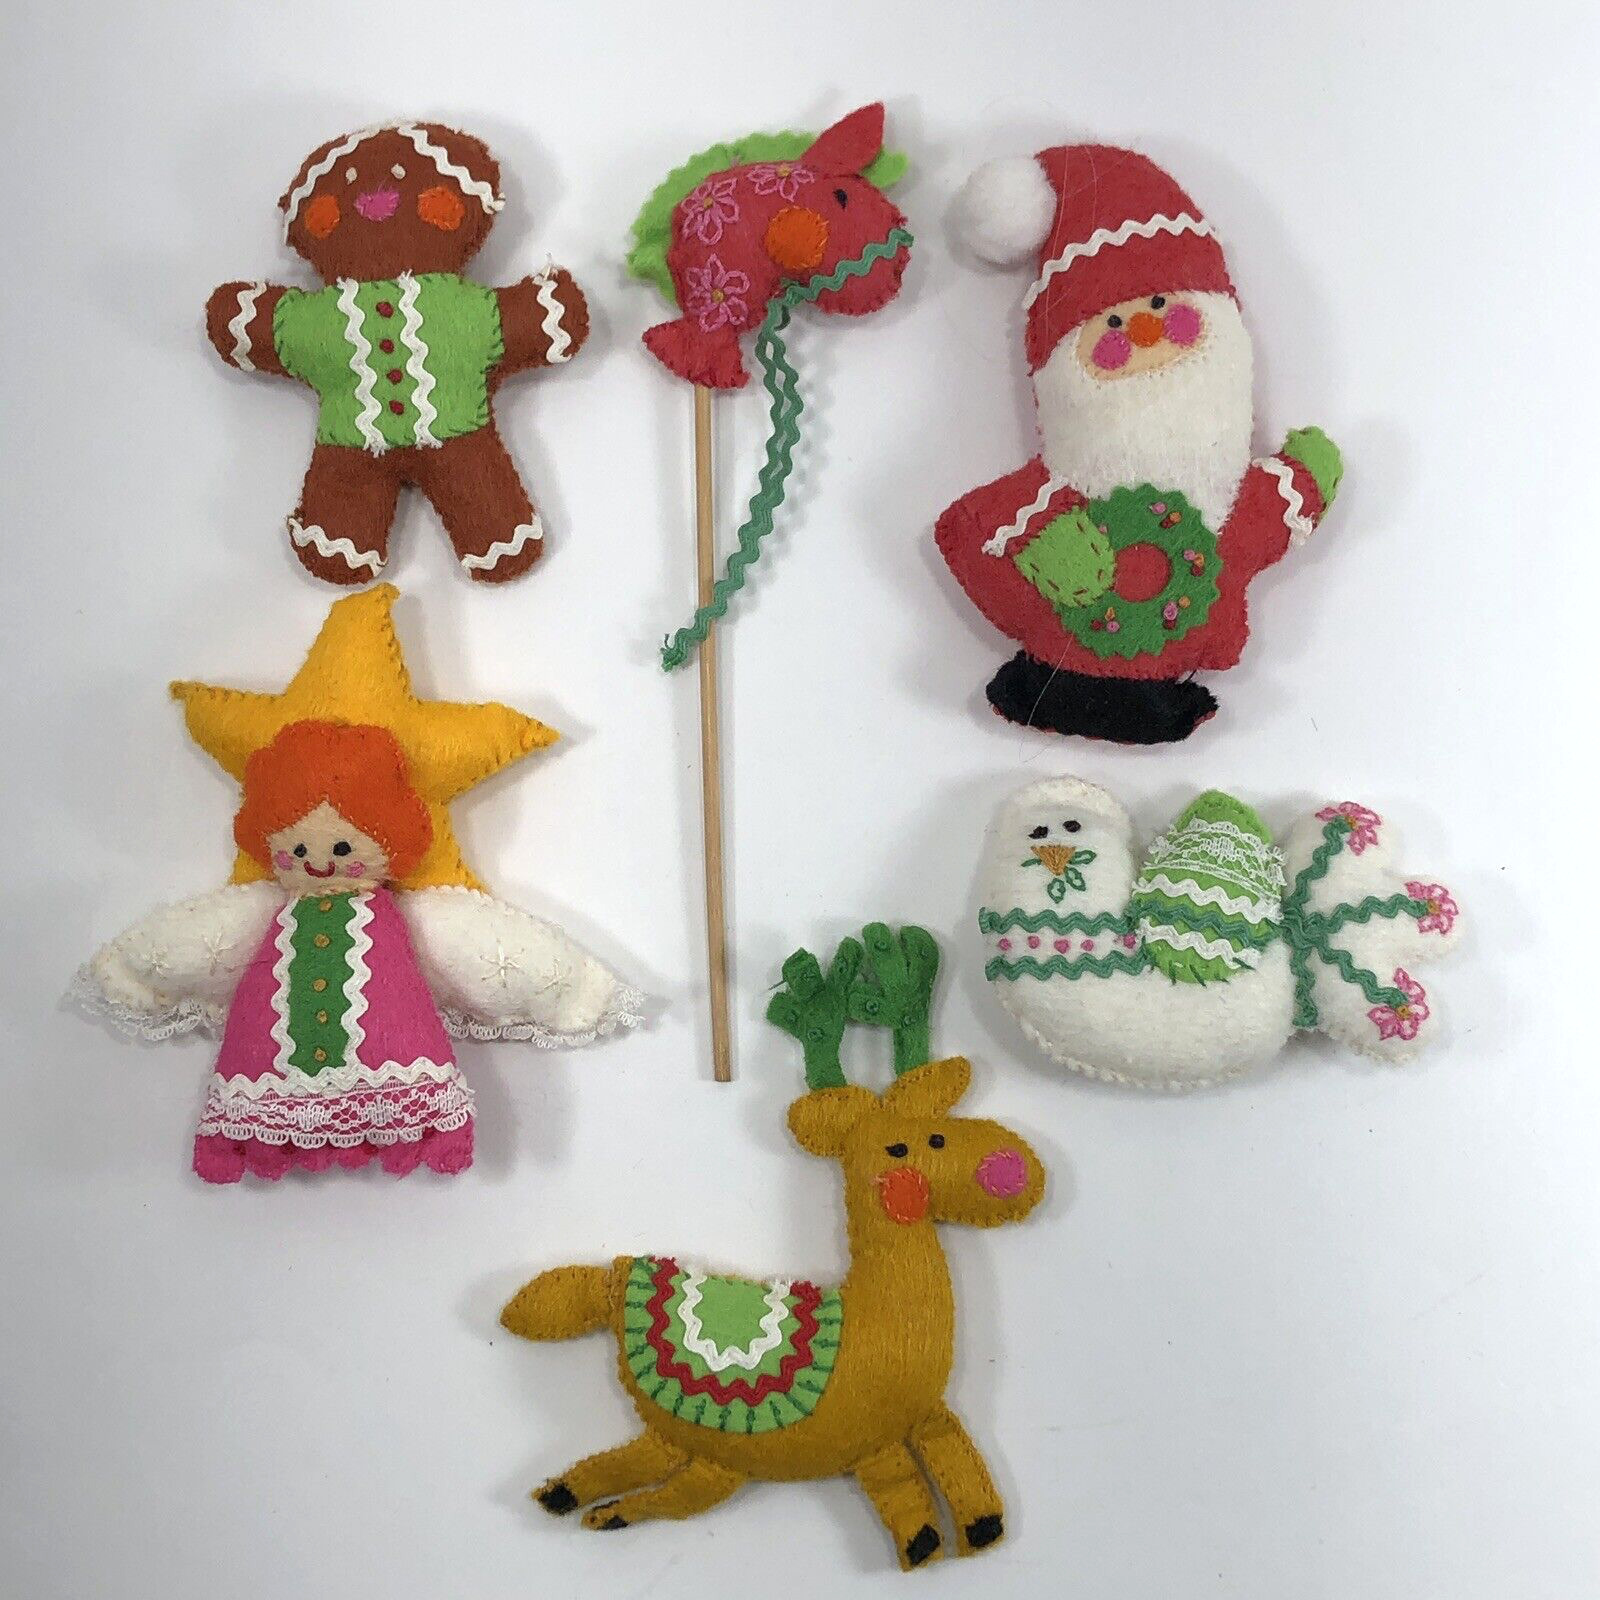 Handmade Felt Christmas Ornament With Rick Rack Lace Embroidery Set Of 6